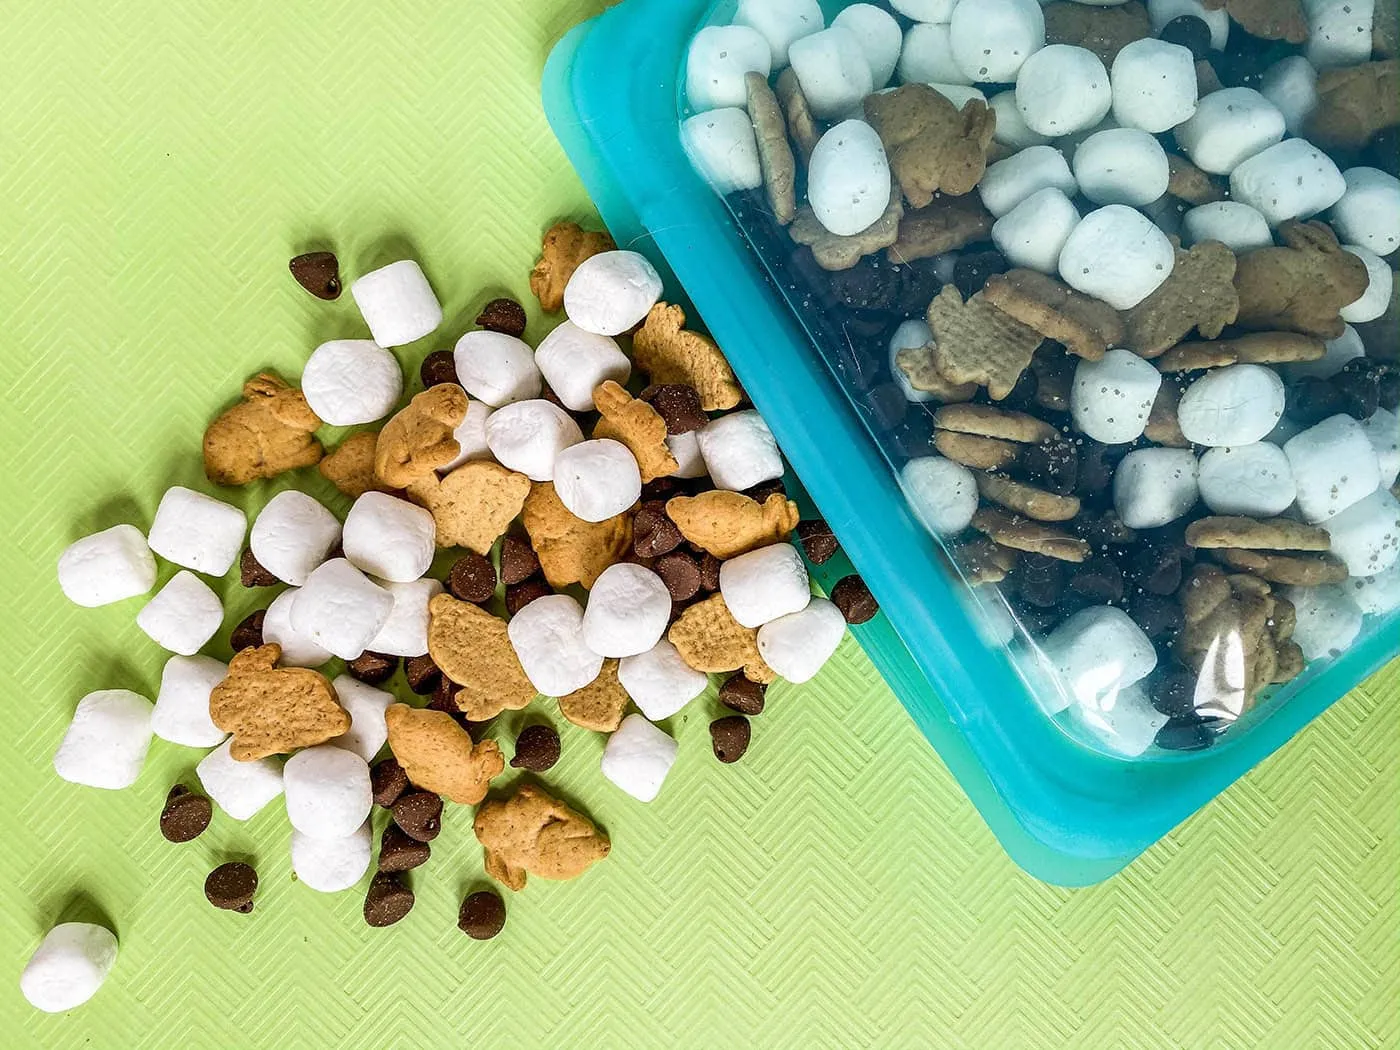 This s'mores snack mix recipe takes all the components of that camping staple we all know and love and puts it into an easy-to-eat-on-the-go package with teddy grahams, chocolate chips, marshmallows, and smoked sugar.